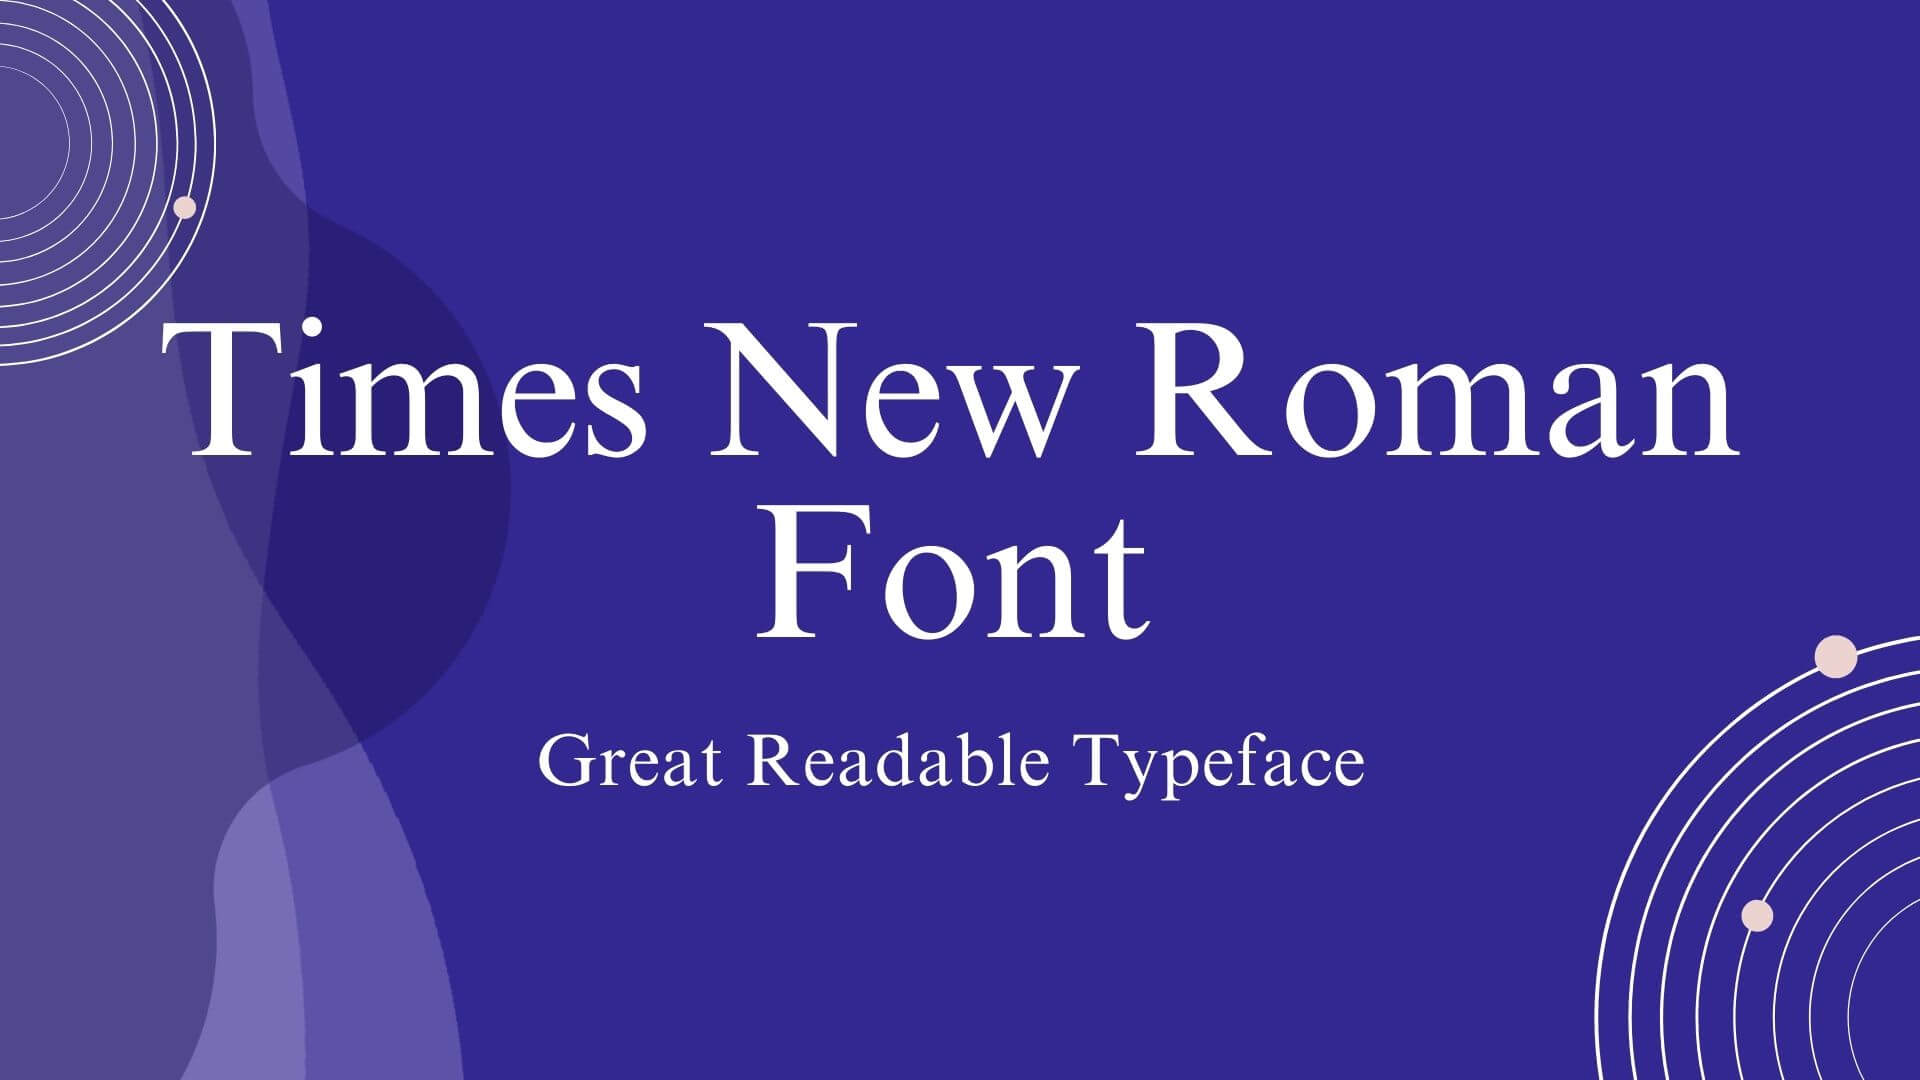 Times new roman font free download download madden 19 pc